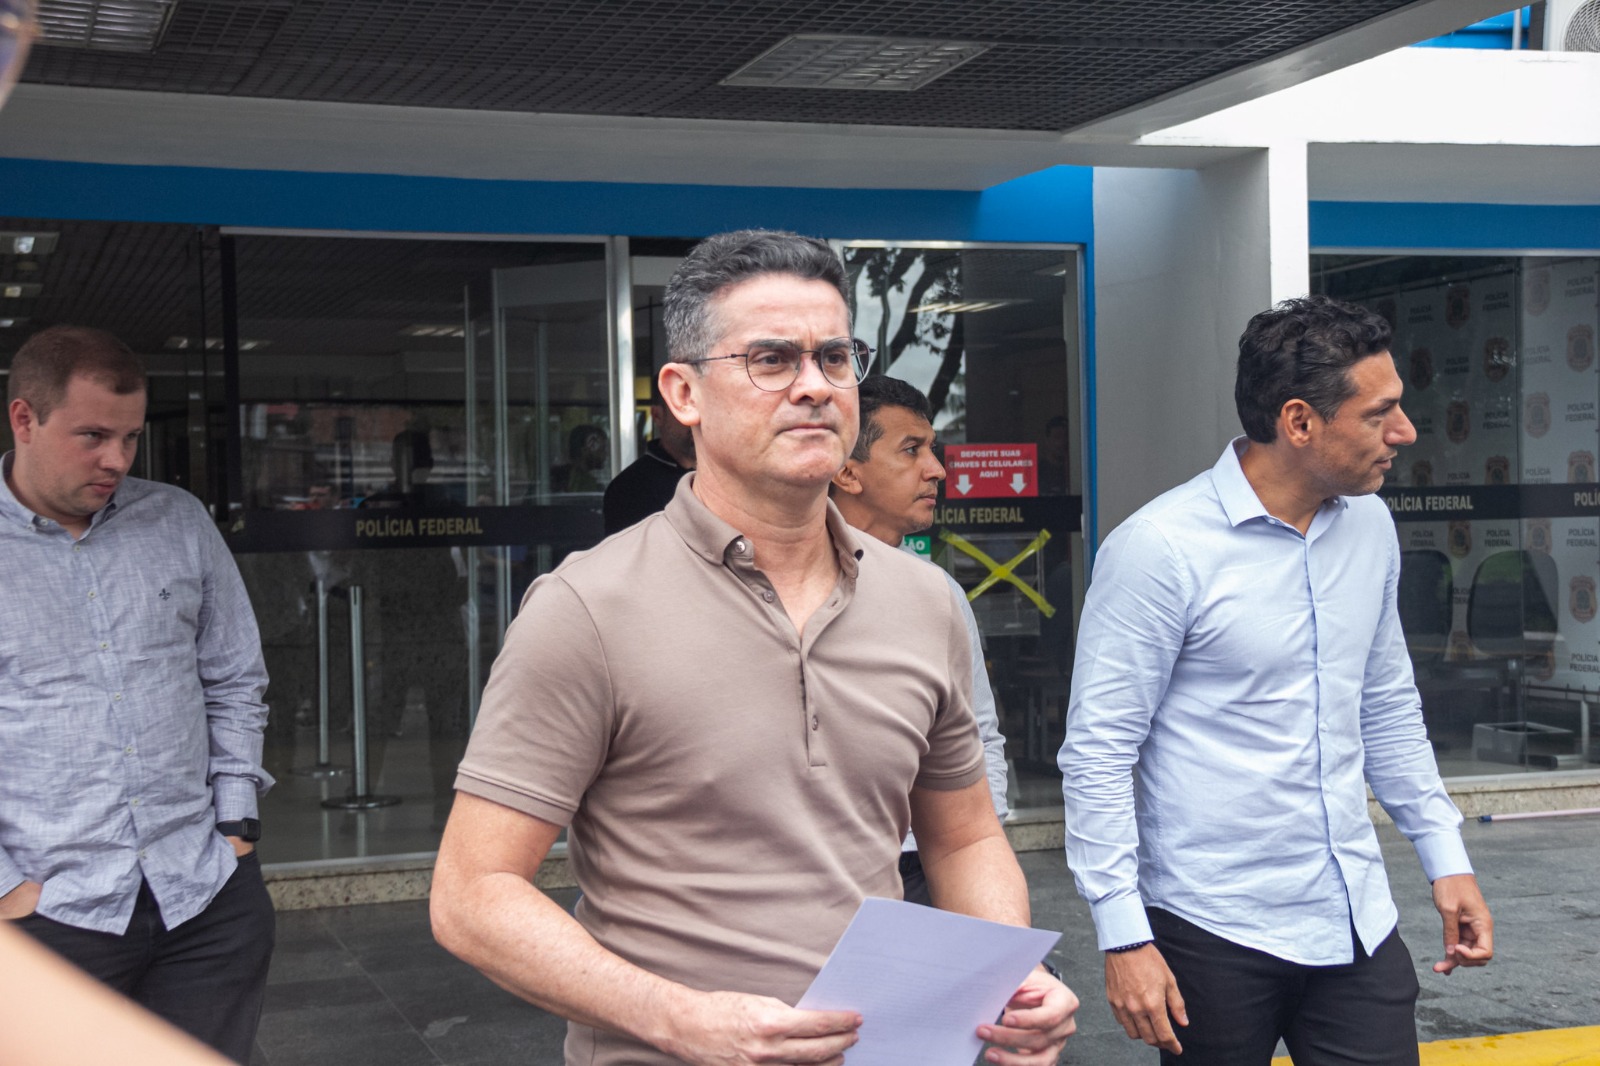 Mayor of Manaus files a complaint with the Federal Police after being the target of criminal audio